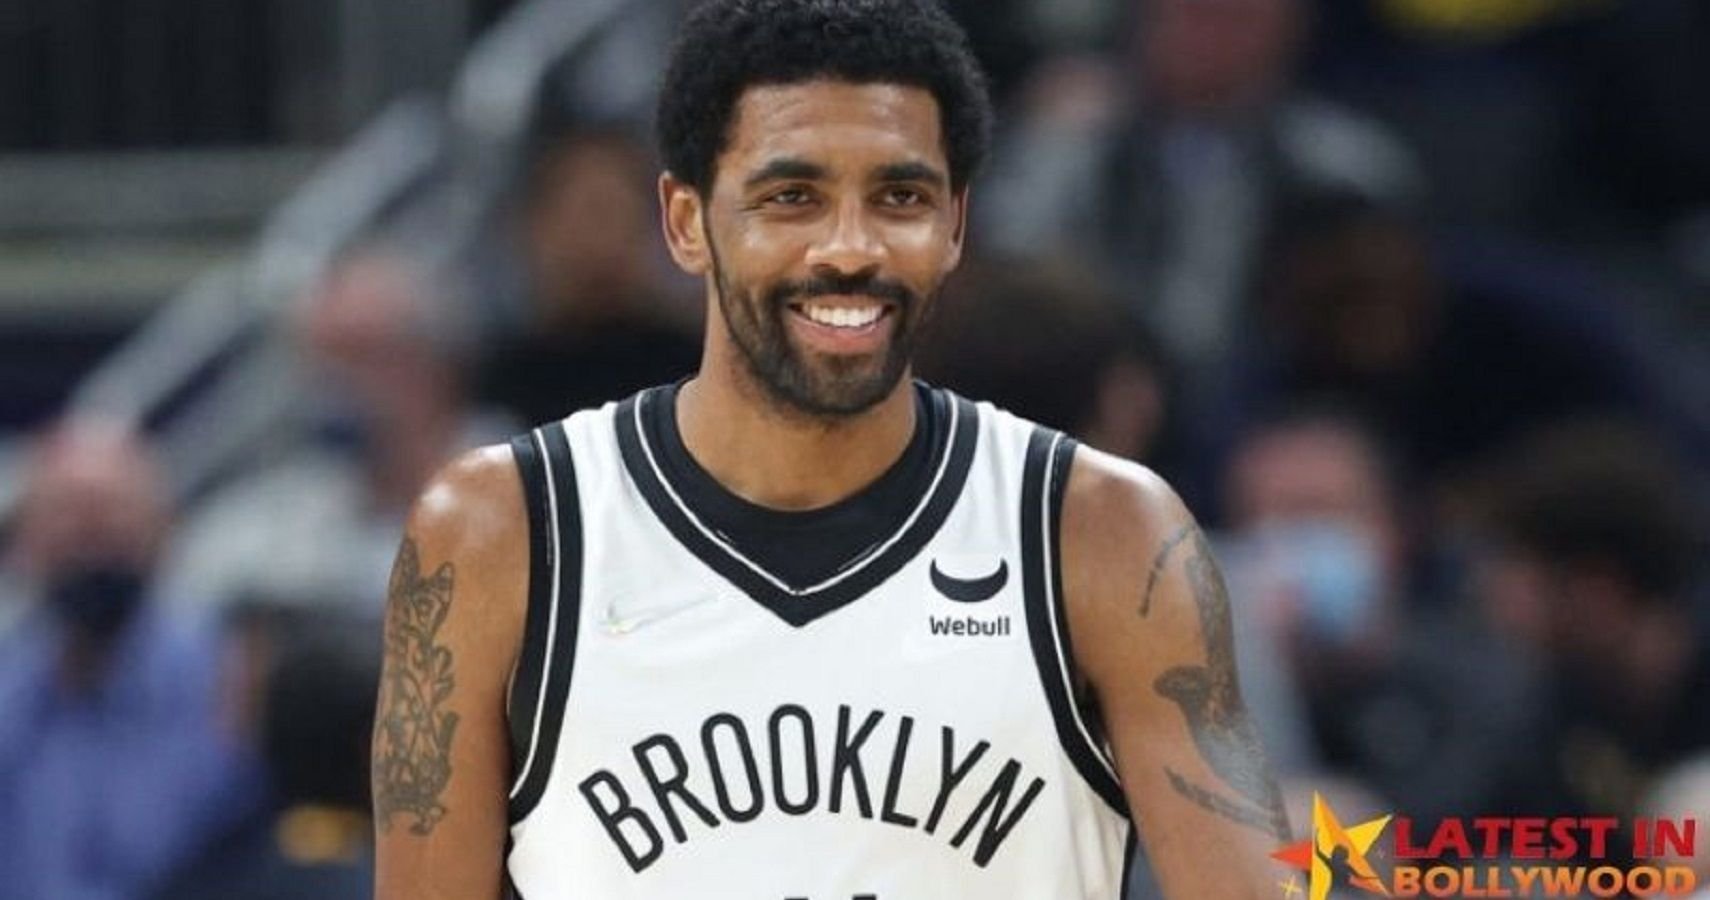 How Kyrie Irving Became An NBA Star And Made His $90 Million Fortune